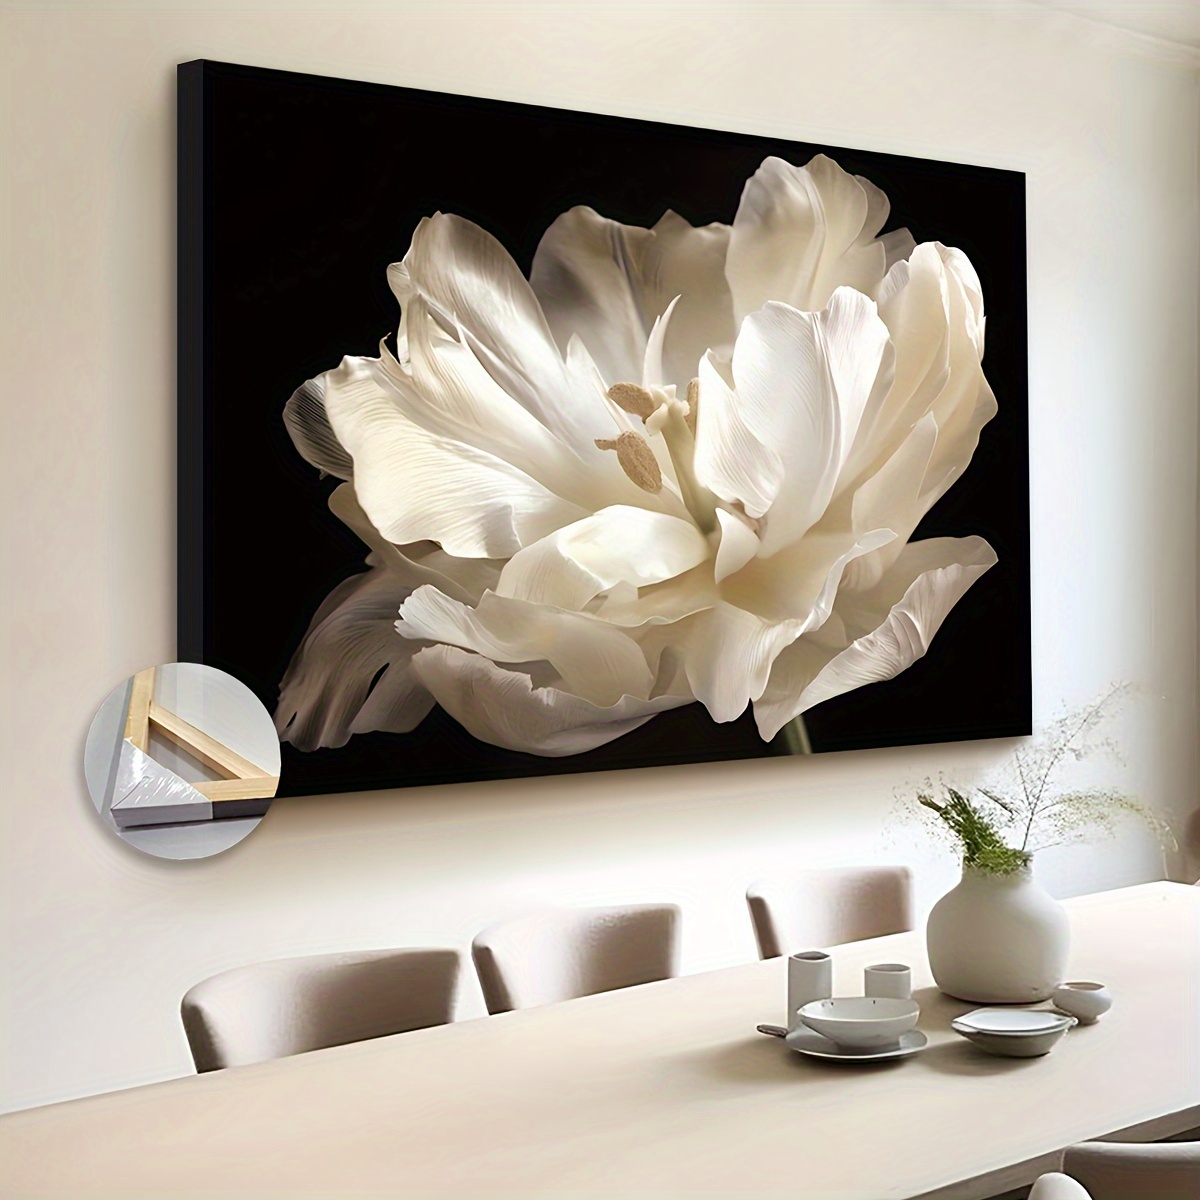 

Extra Large White Tulip Canvas Wall Art - Modern Floral Decor With Wooden Frame, Ready To Hang For Living Room, Bedroom, Home Office